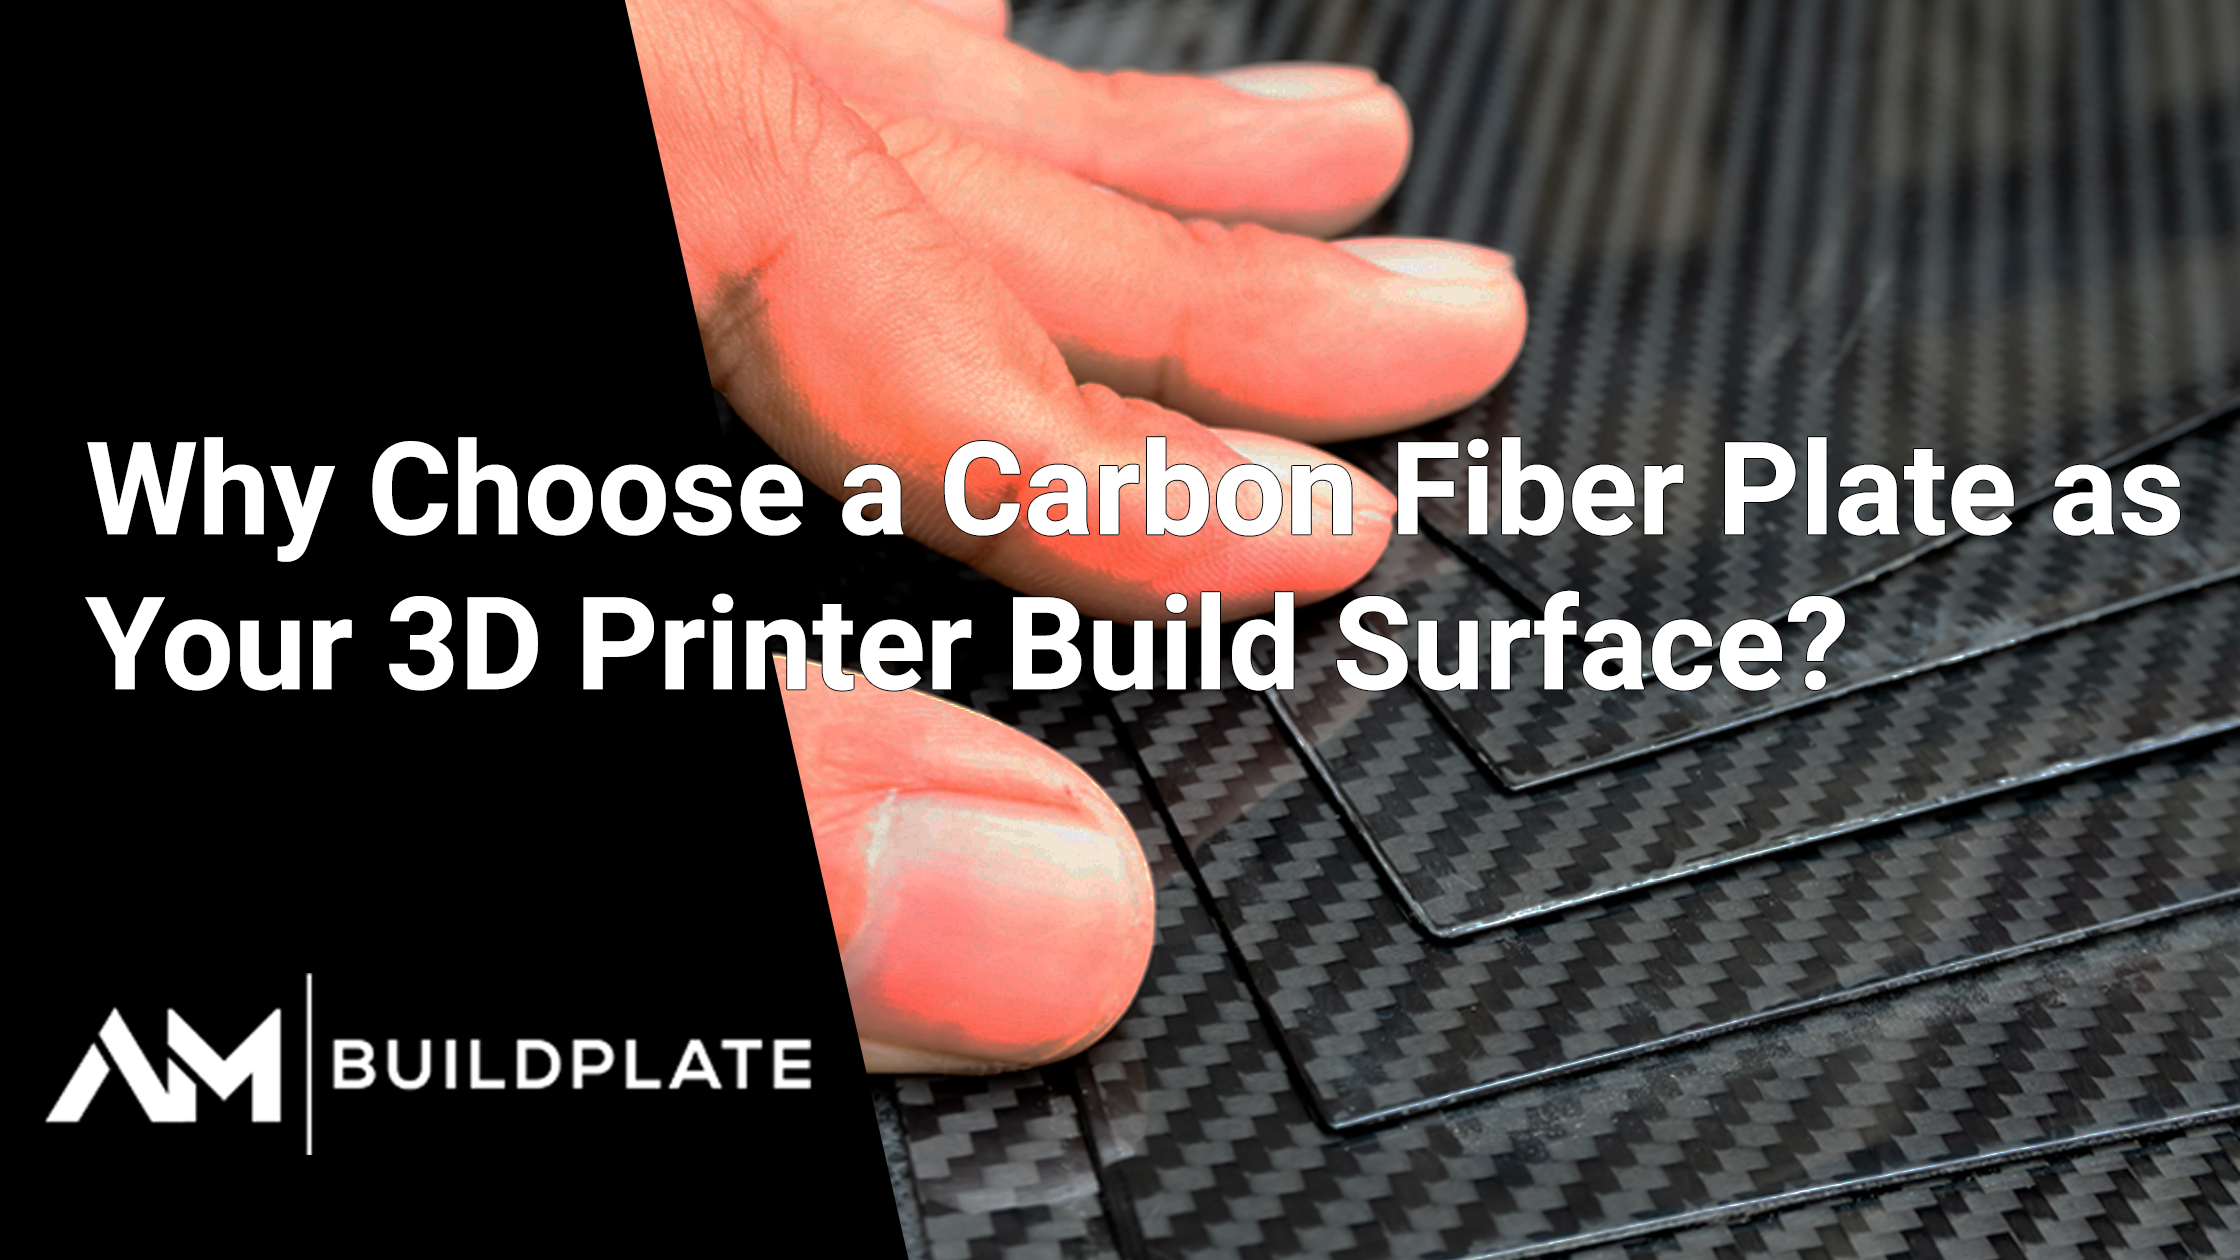 The advantages of 3D printing with carbon fiber - UltiMaker